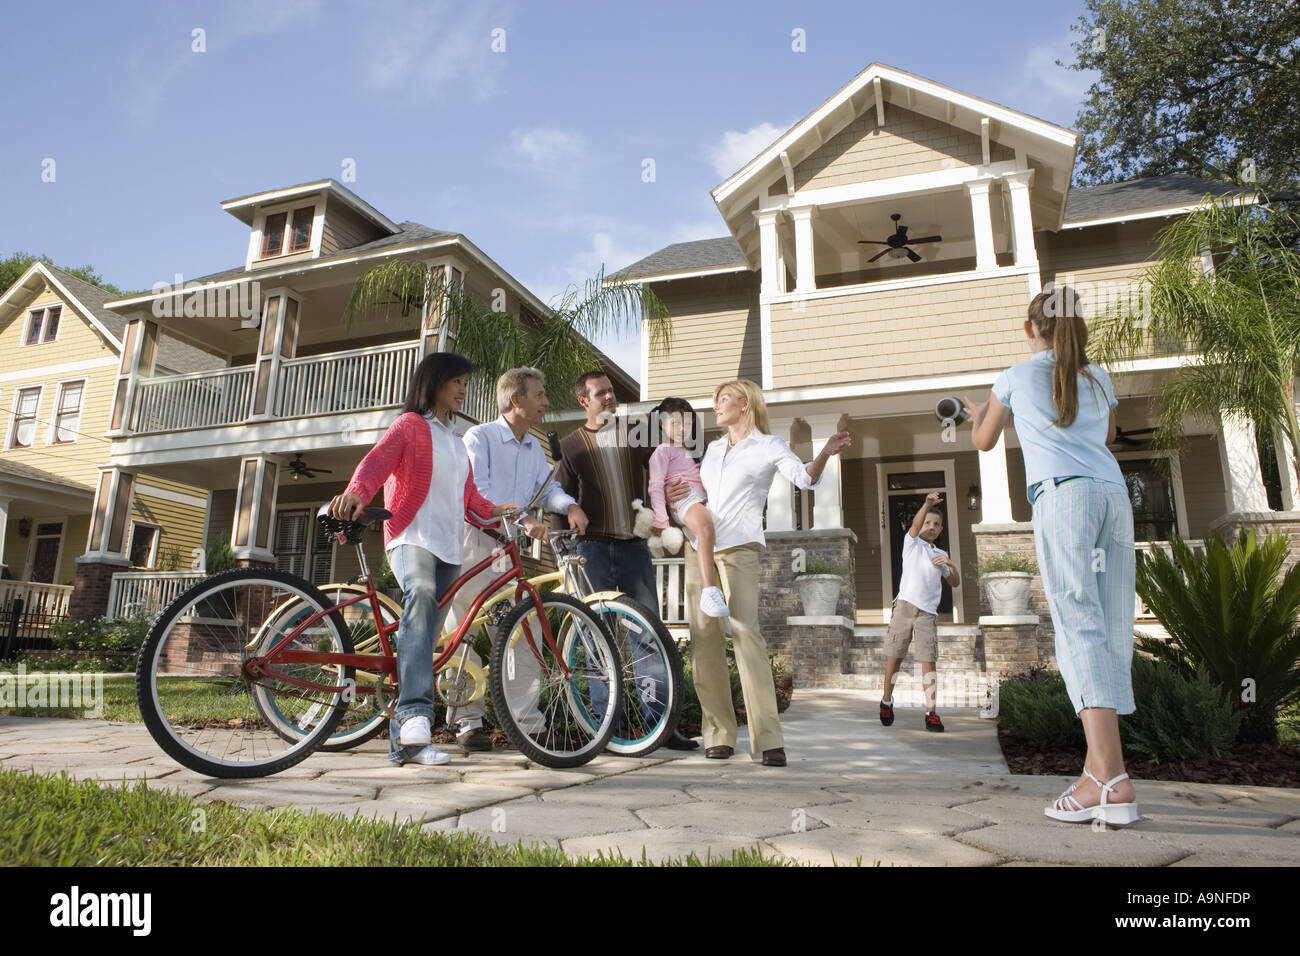 Family with young children conversing with neighbors in front of house Stock Photo